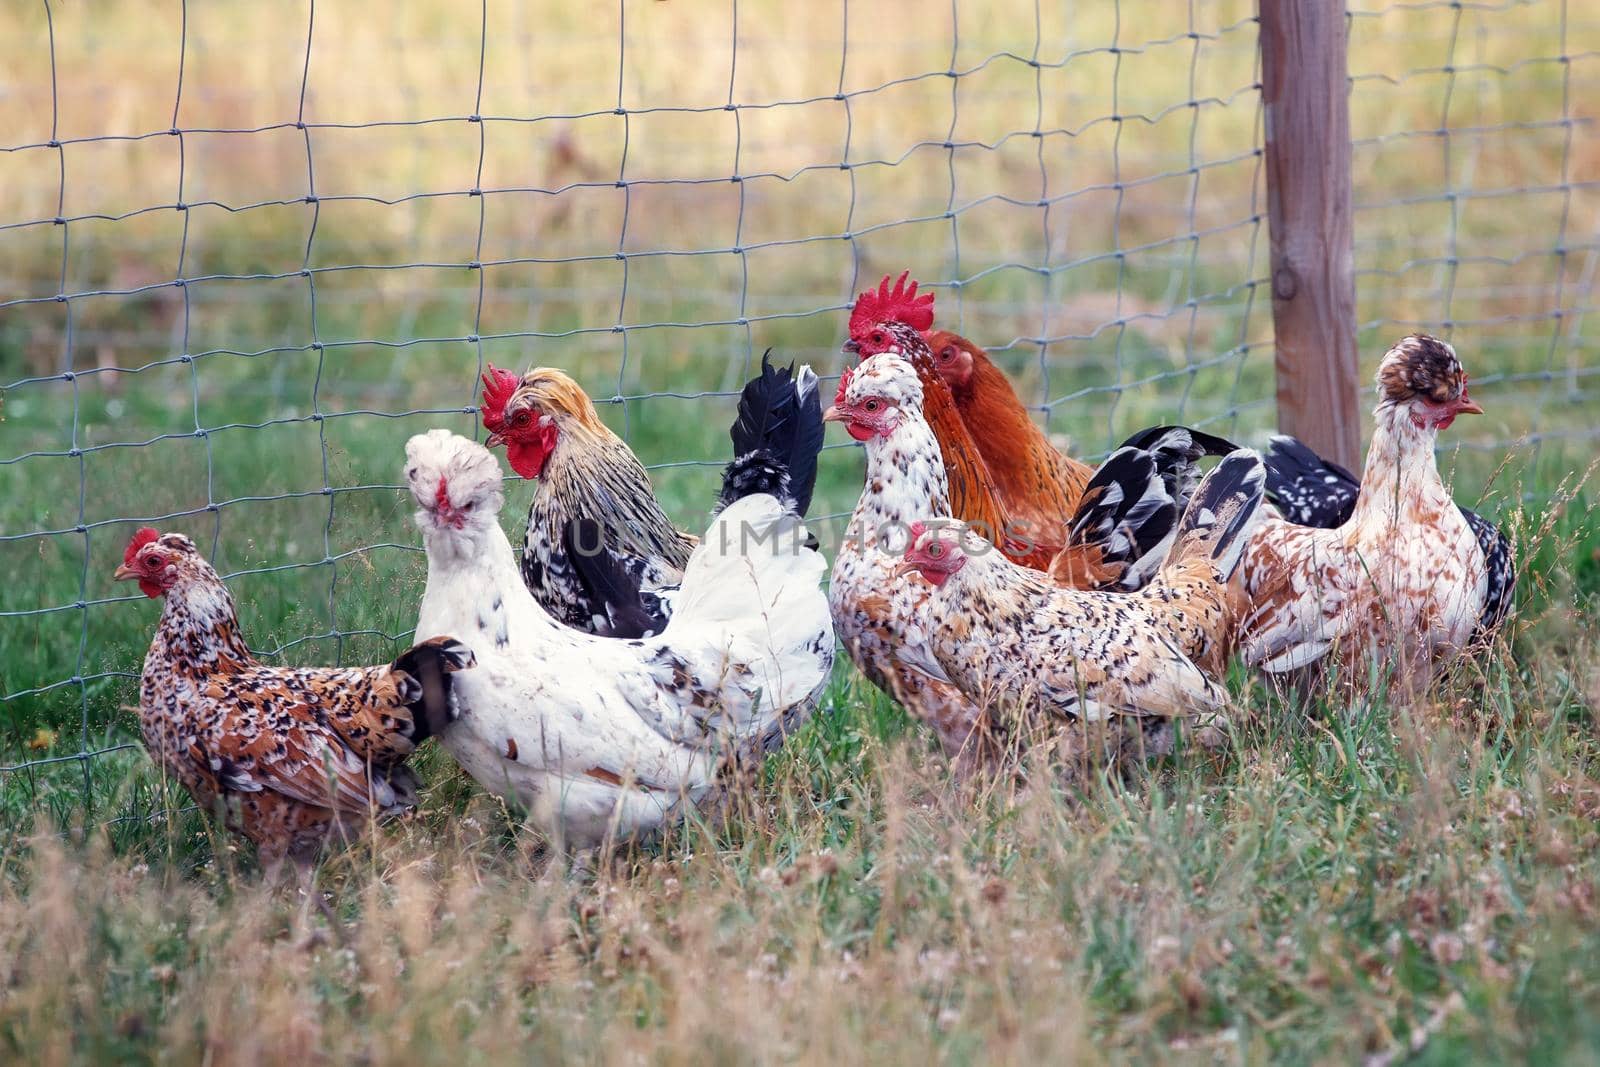 A close up of a flock of coloured inquisitive chickens seen through the fence of a protected area